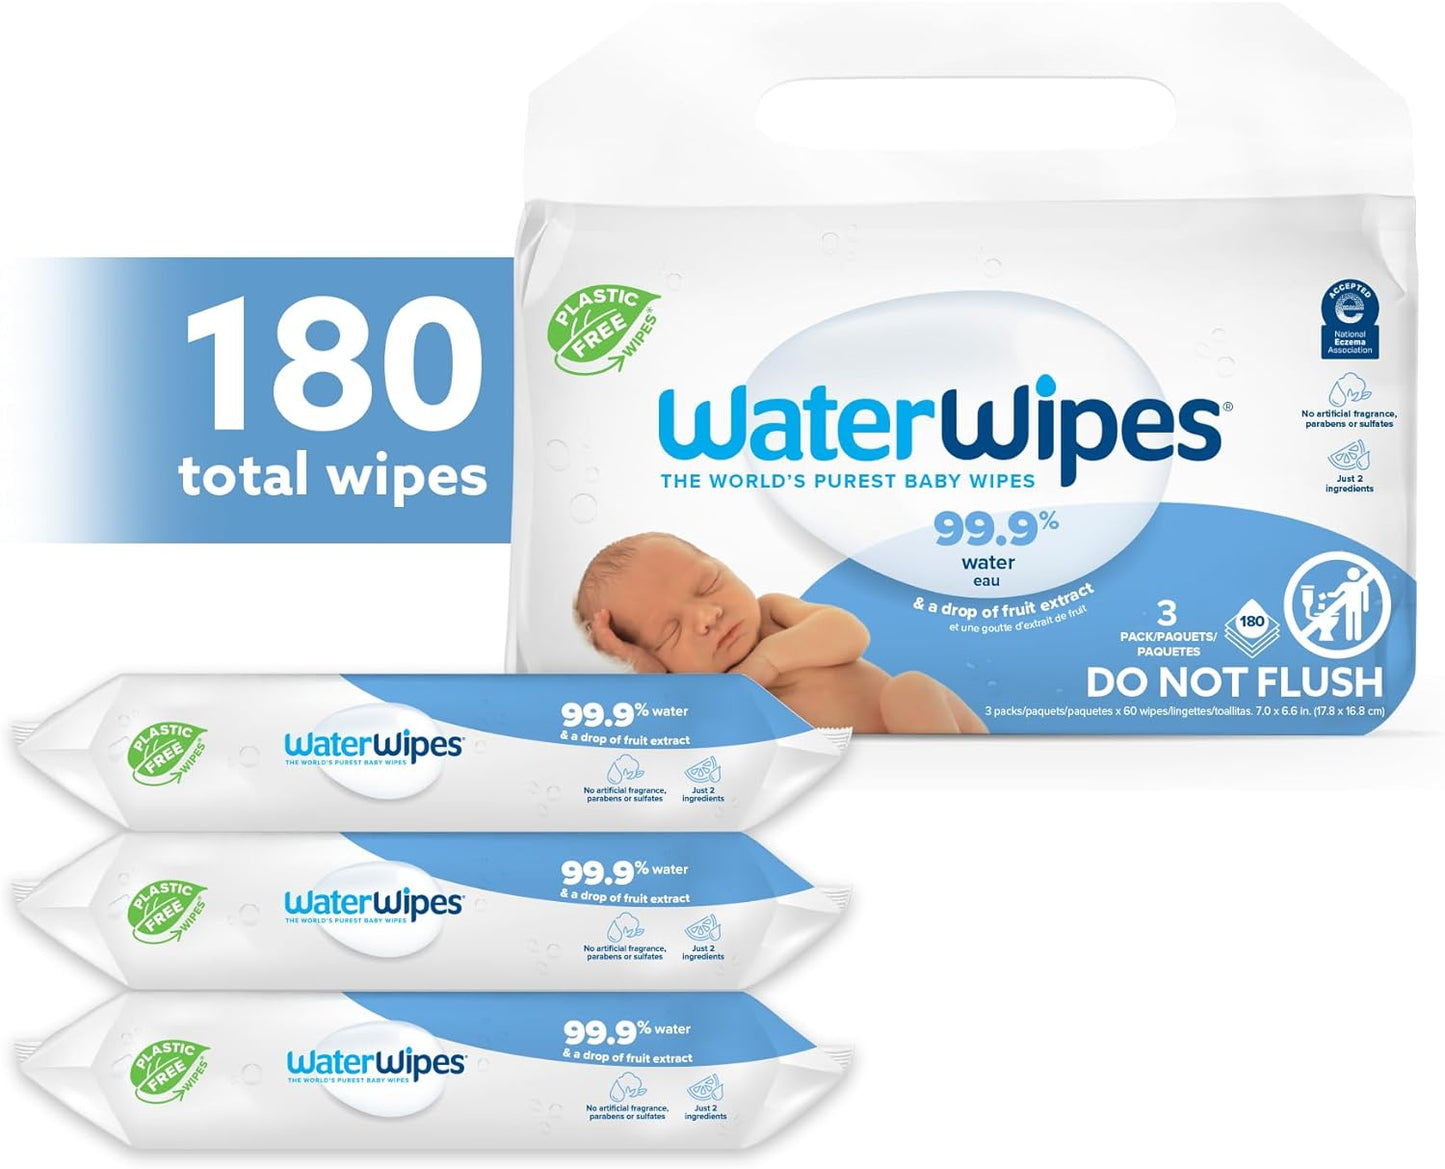 WaterWipes Plastic-Free Original Baby Wipes, 99.9% Water Based Wipes, Unscented & Hypoallergenic for Sensitive Skin, 60 Count (Pack of 12), Packaging May Vary